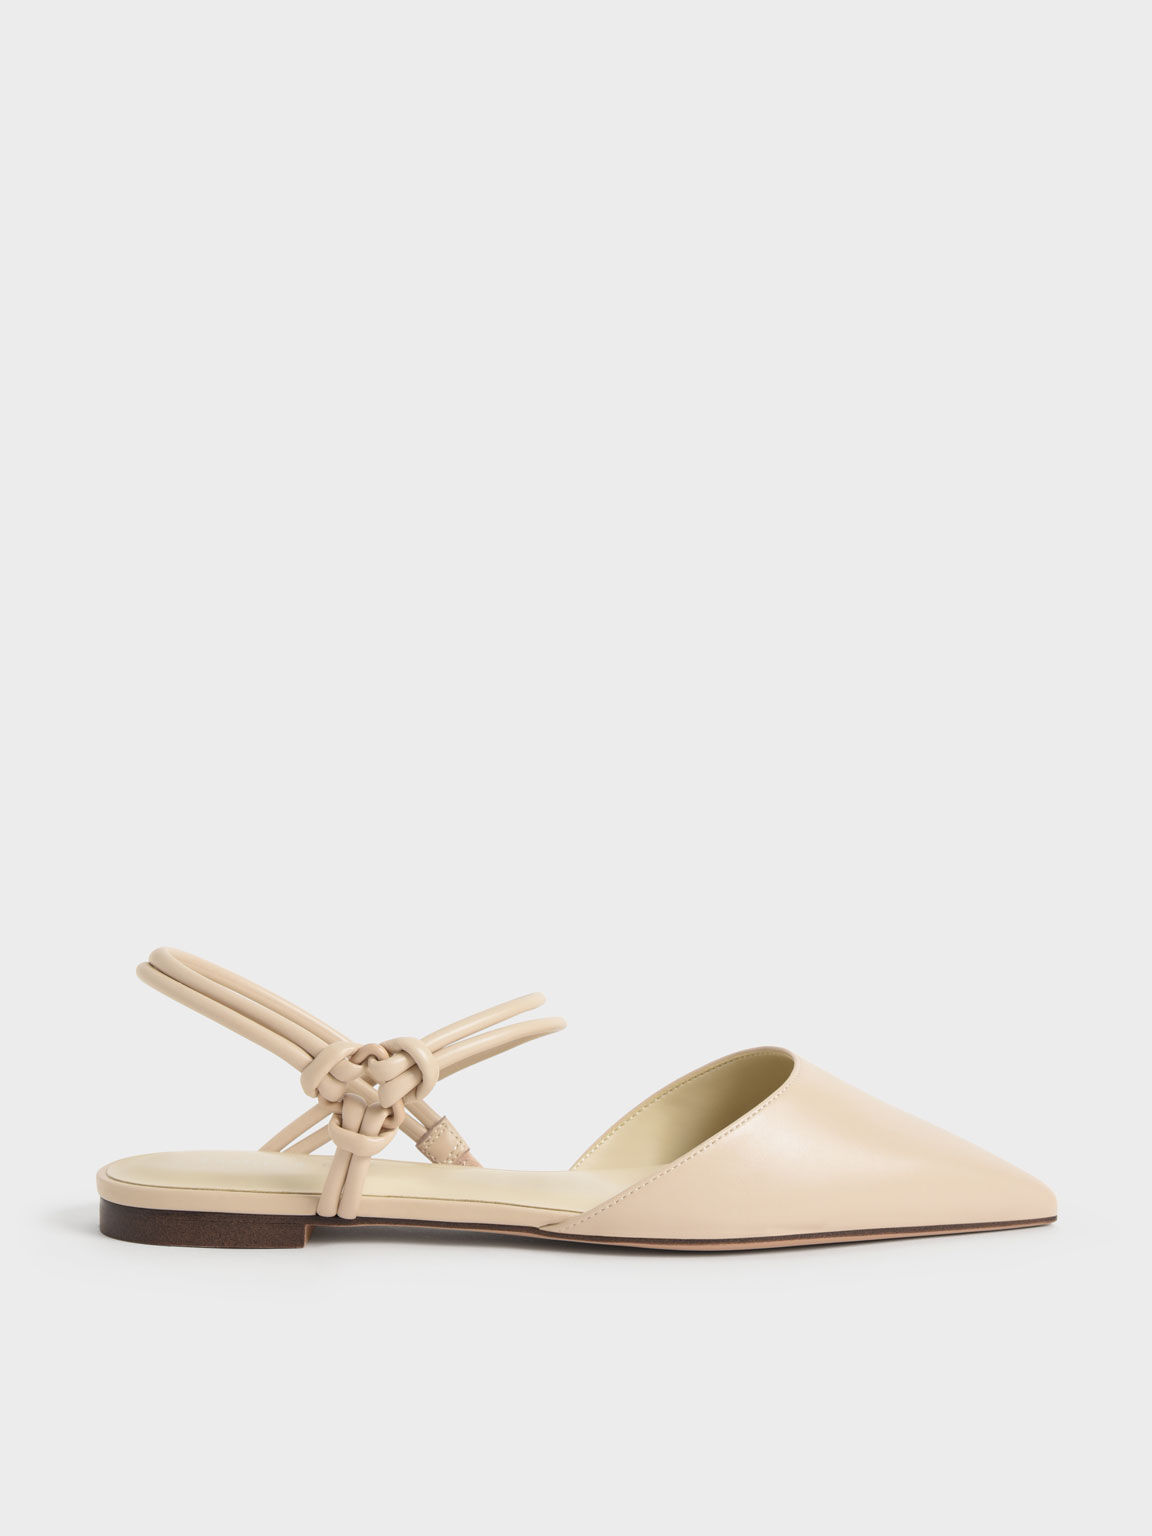 Knotted Ankle-Strap Ballerina Flats, Chalk, hi-res